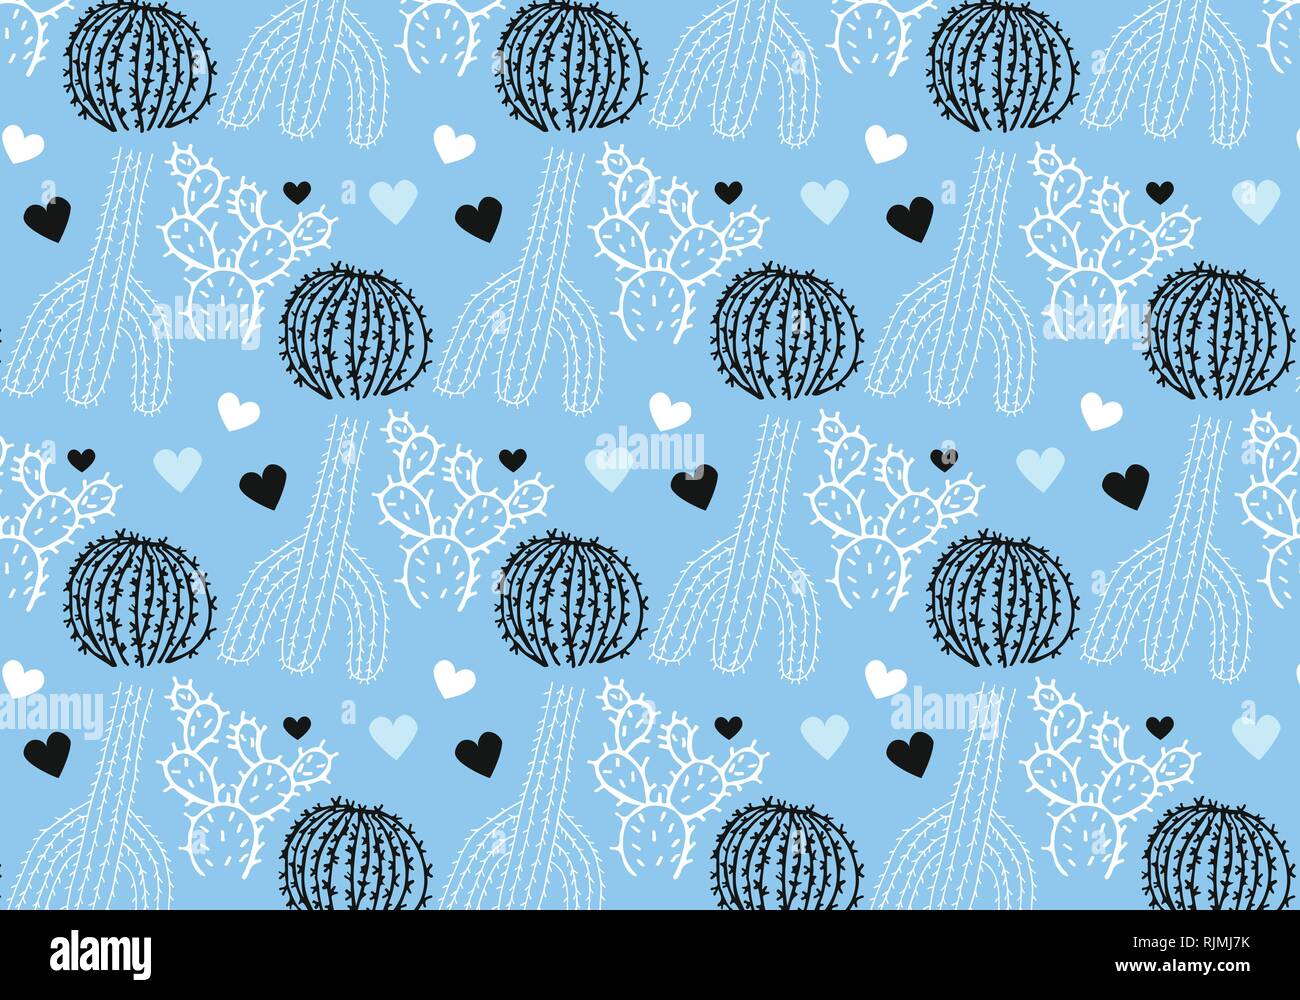 Cactus and hearts vector pattern in white, blue and black color palette Stock Vector